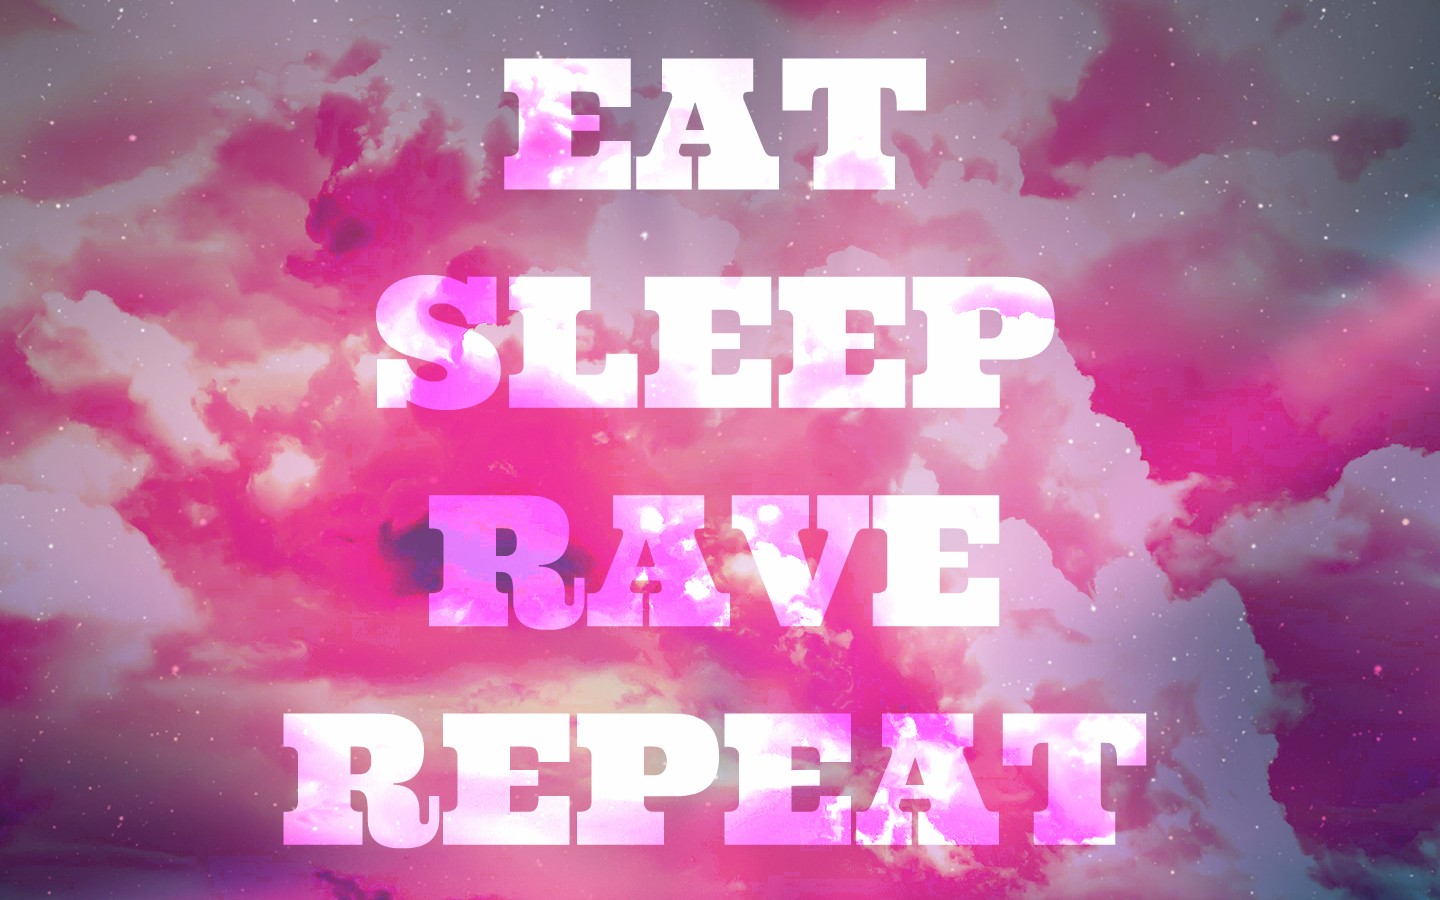 General 1440x900 pink clouds rave EDM dancing typography music